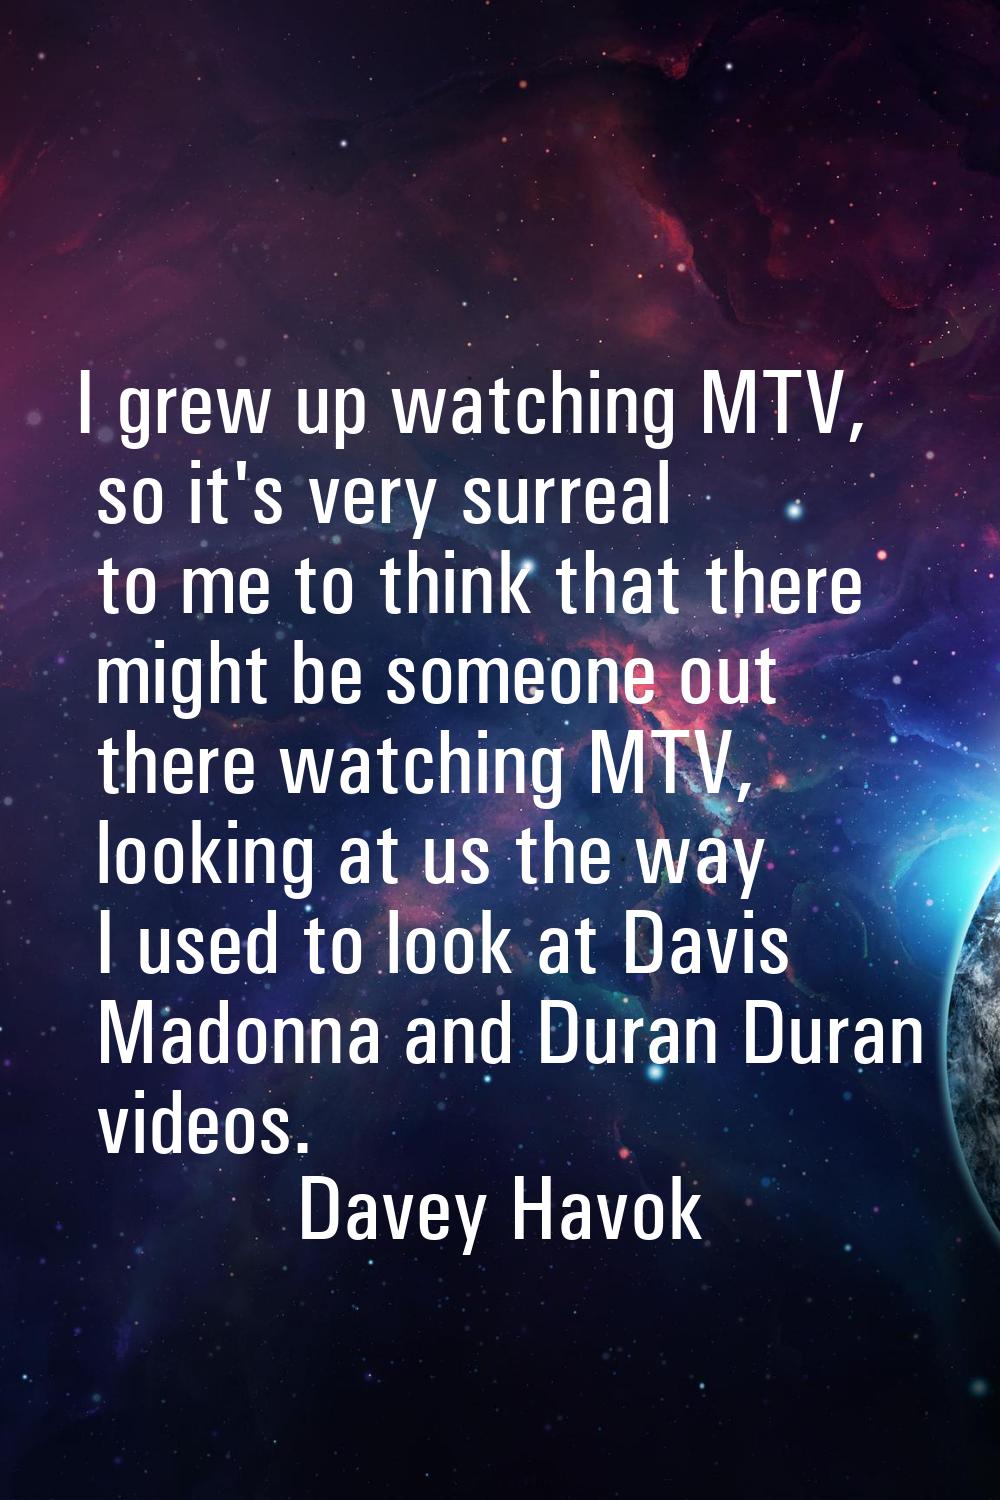 I grew up watching MTV, so it's very surreal to me to think that there might be someone out there w